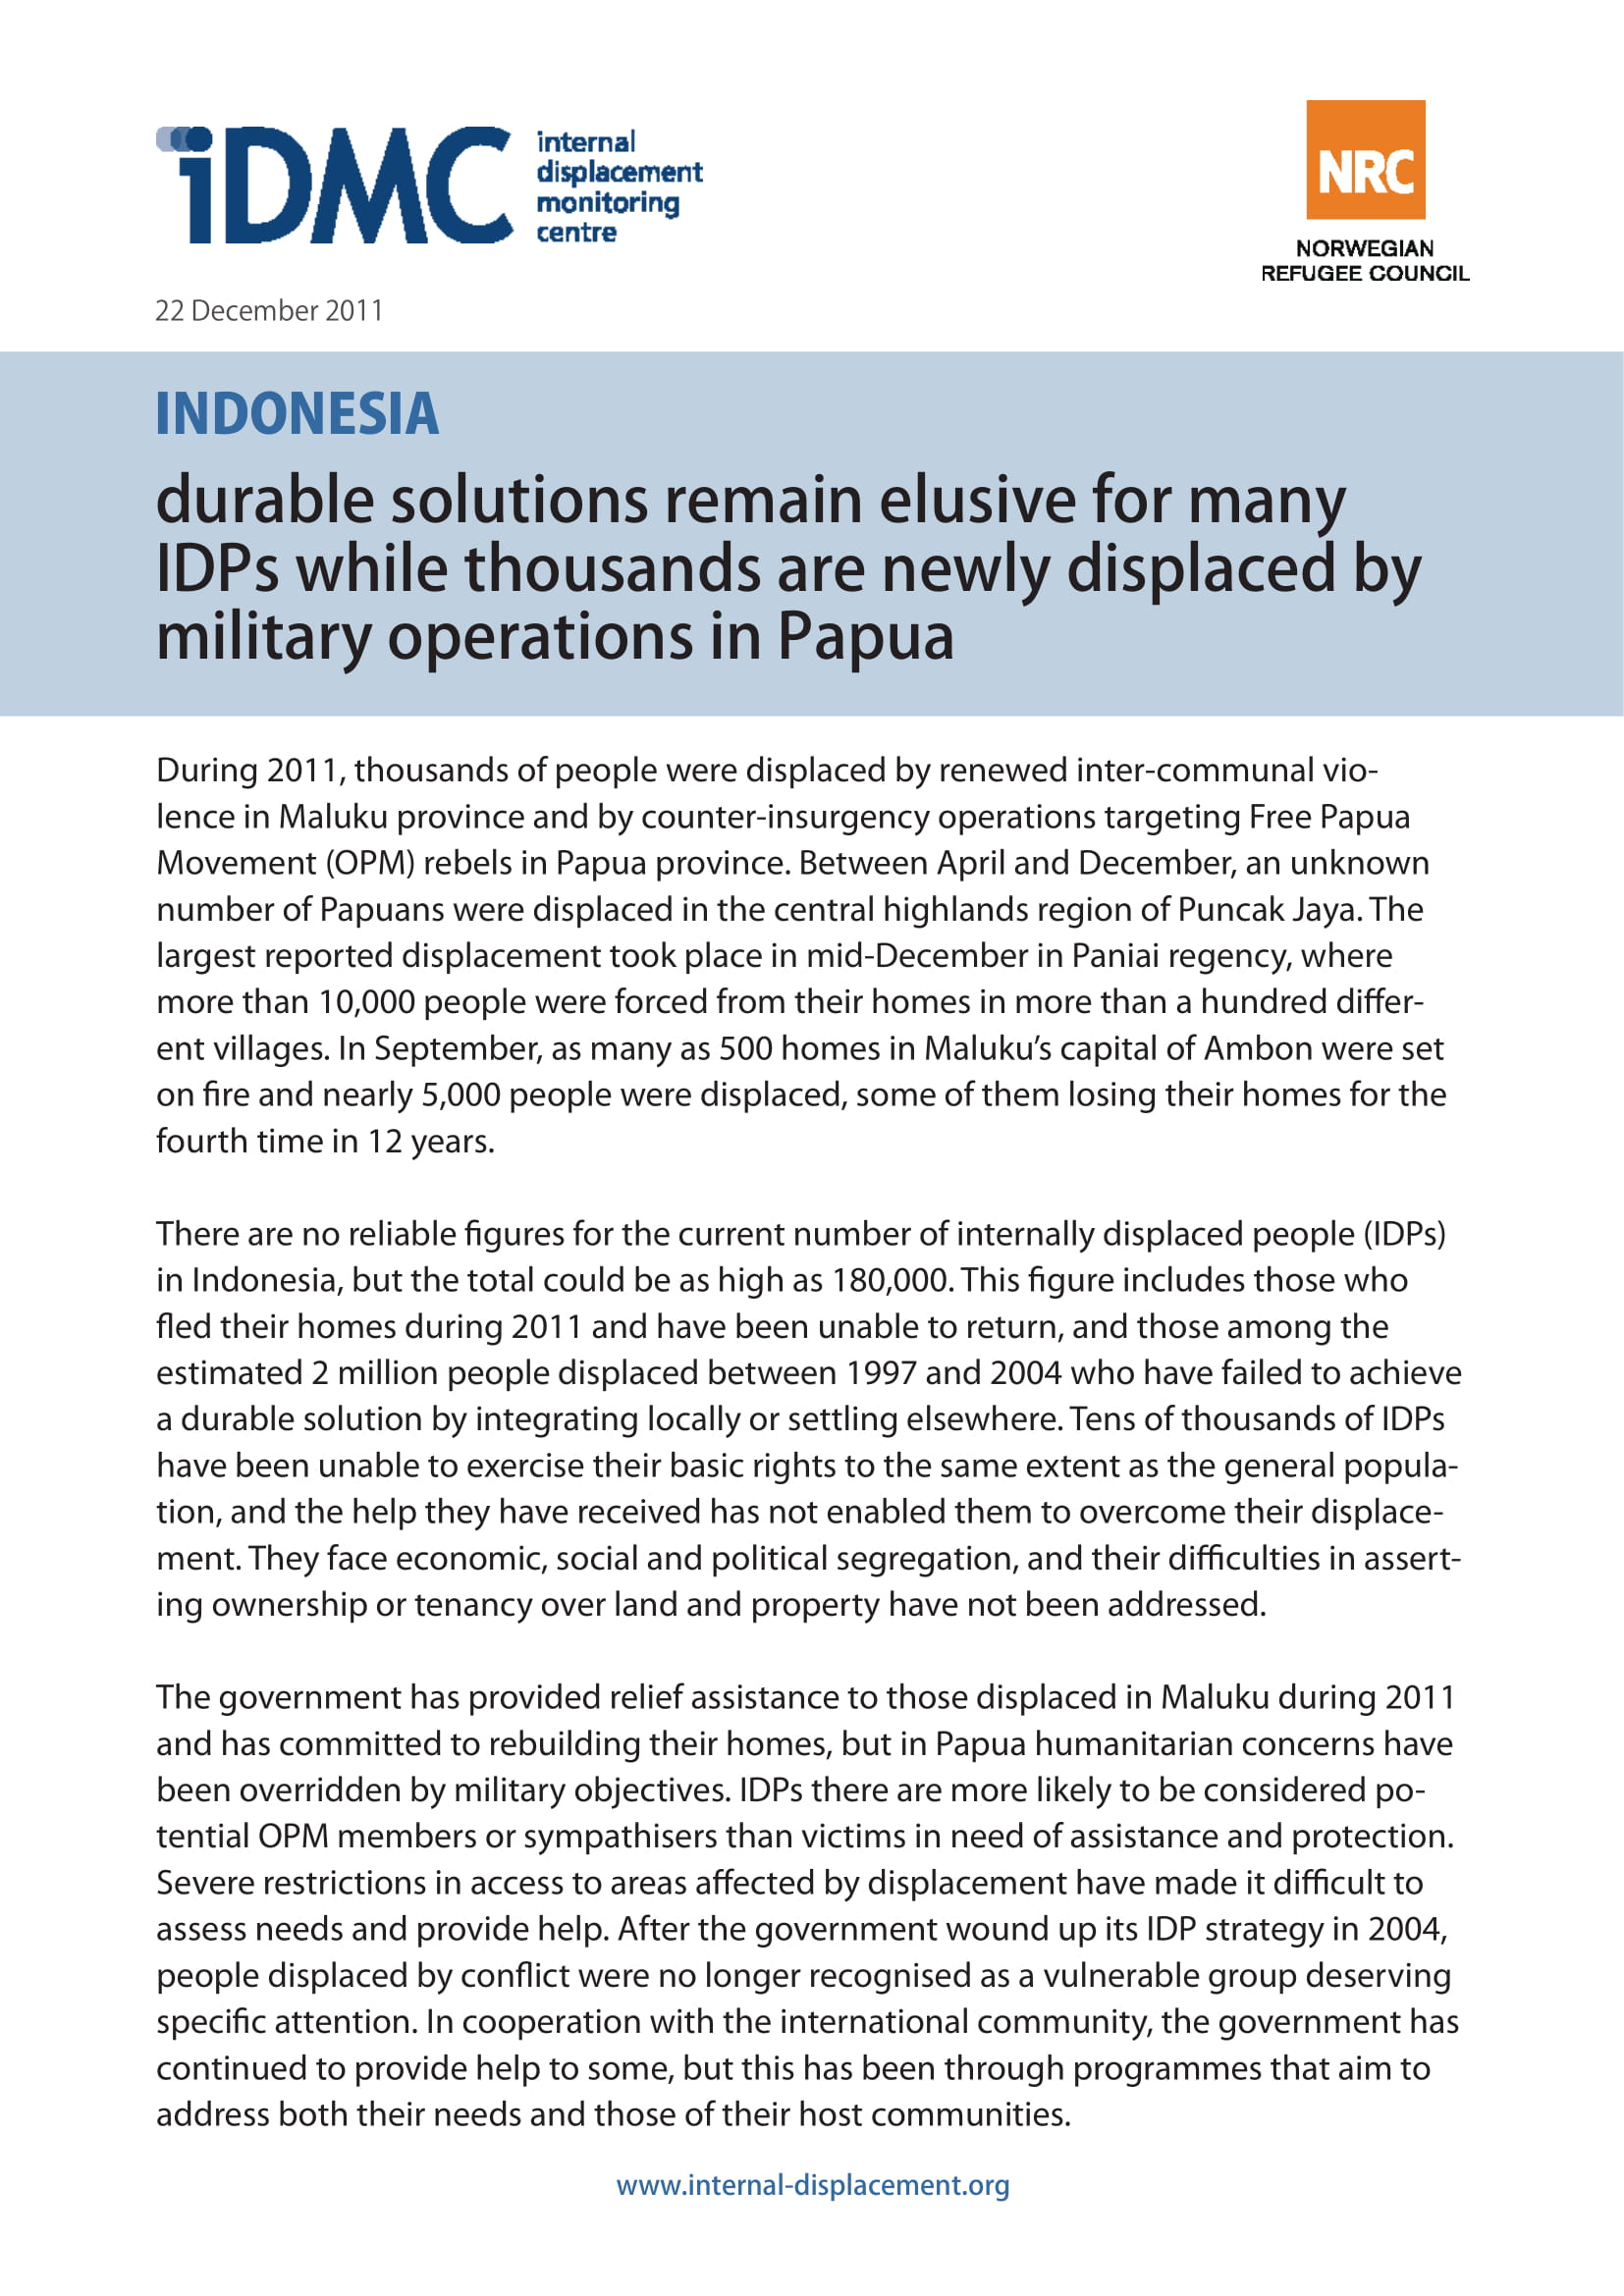 Indonesia: Durable solutions remain elusive for many IDPs while thousands are newly displaced by military operations in Papua